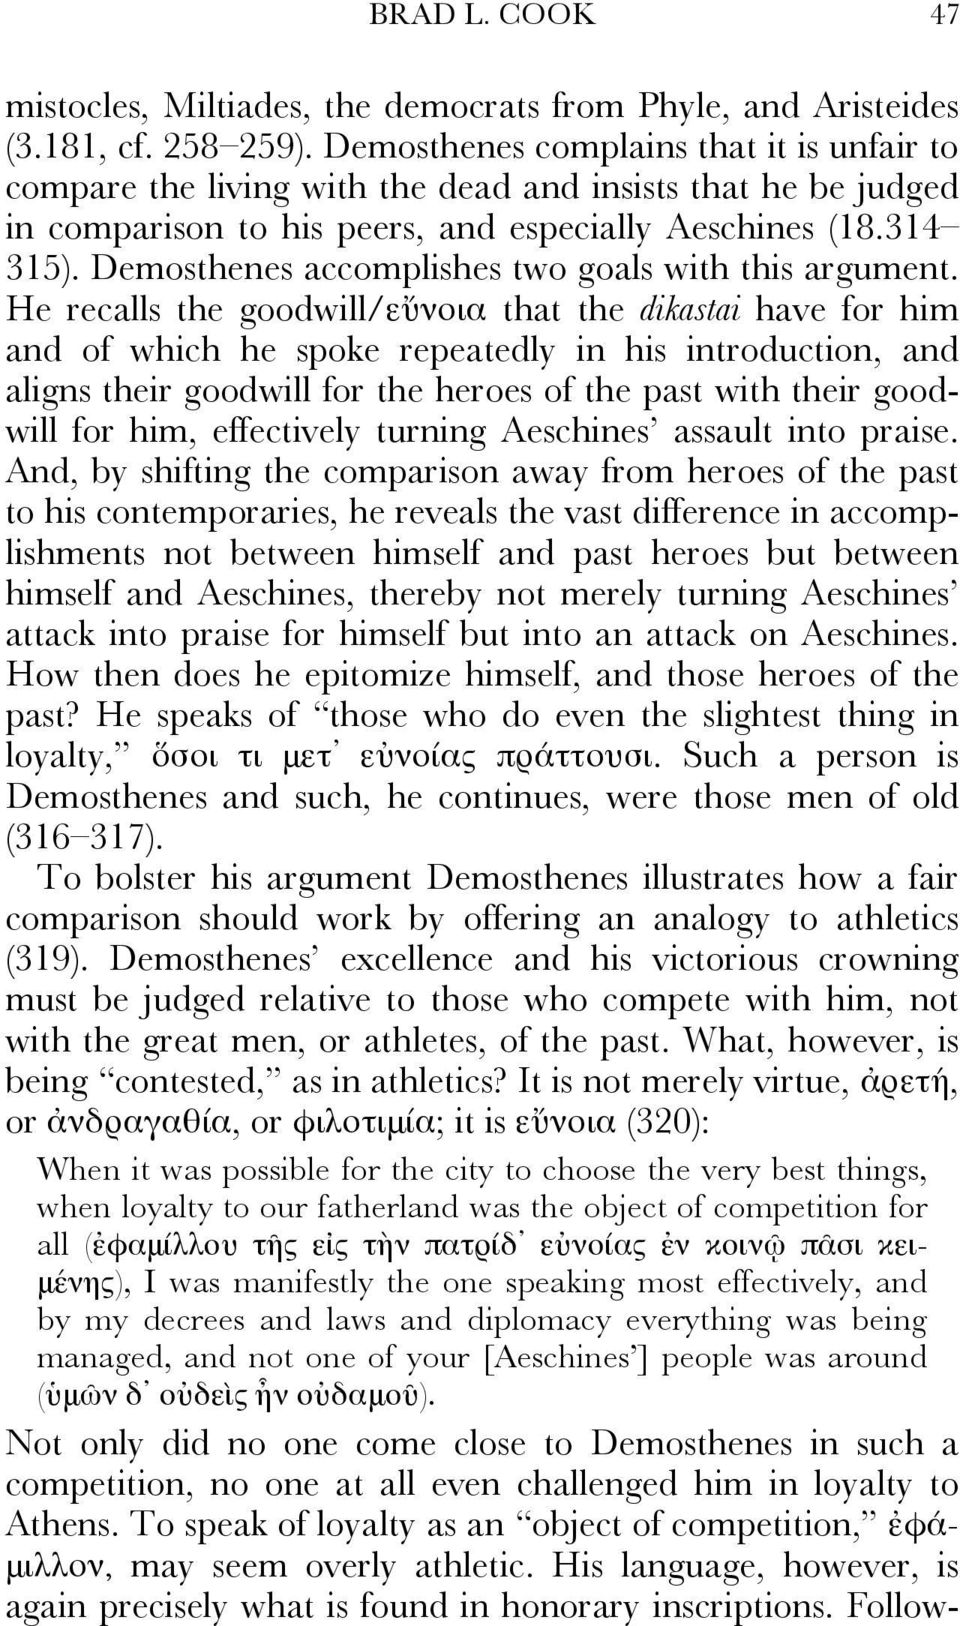 Demosthenes accomplishes two goals with this argument.